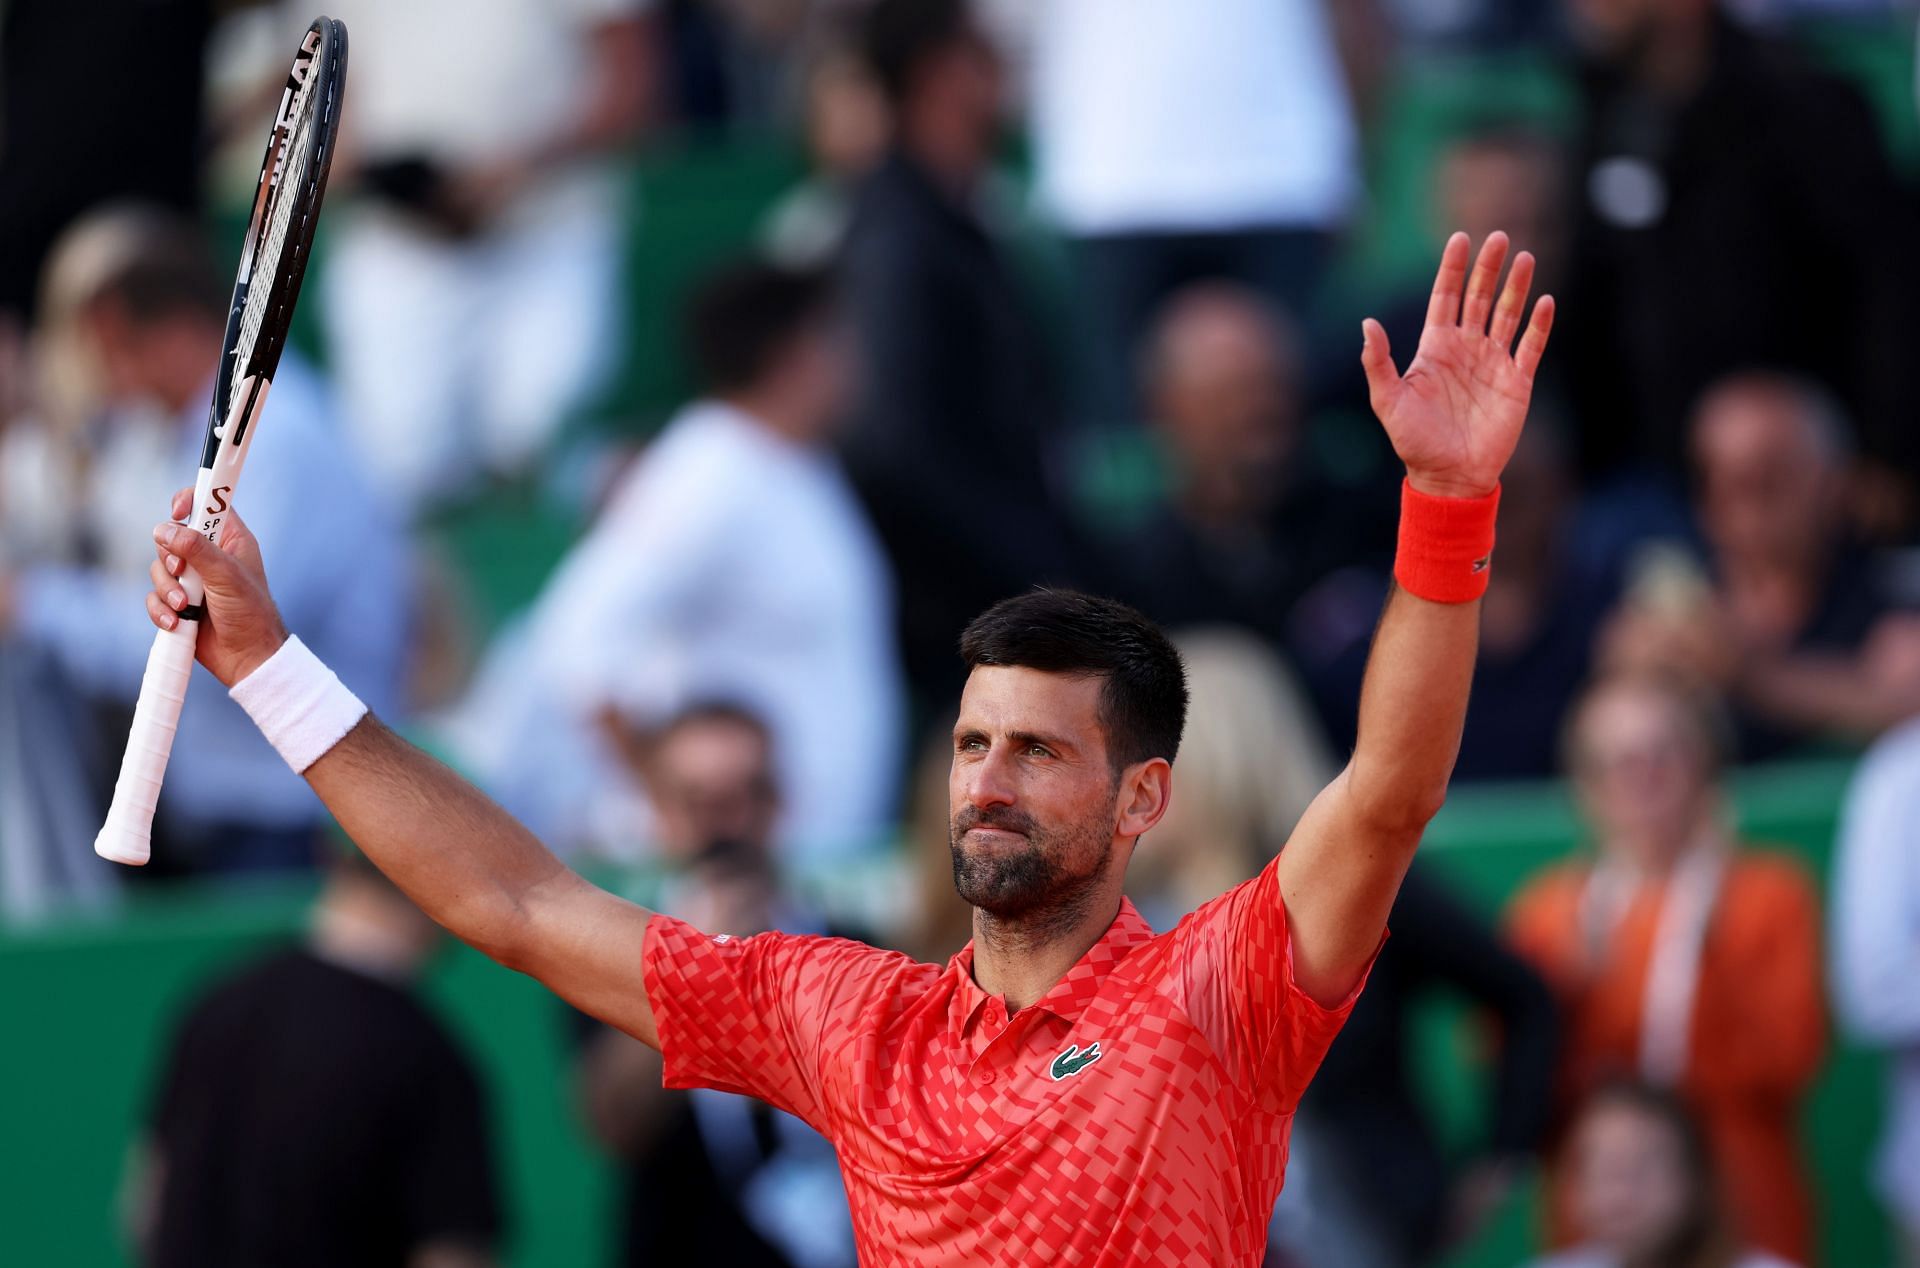 Monte-Carlo Masters 2023 Schedule Today TV schedule, start time, order of play, live stream details and more Day 5